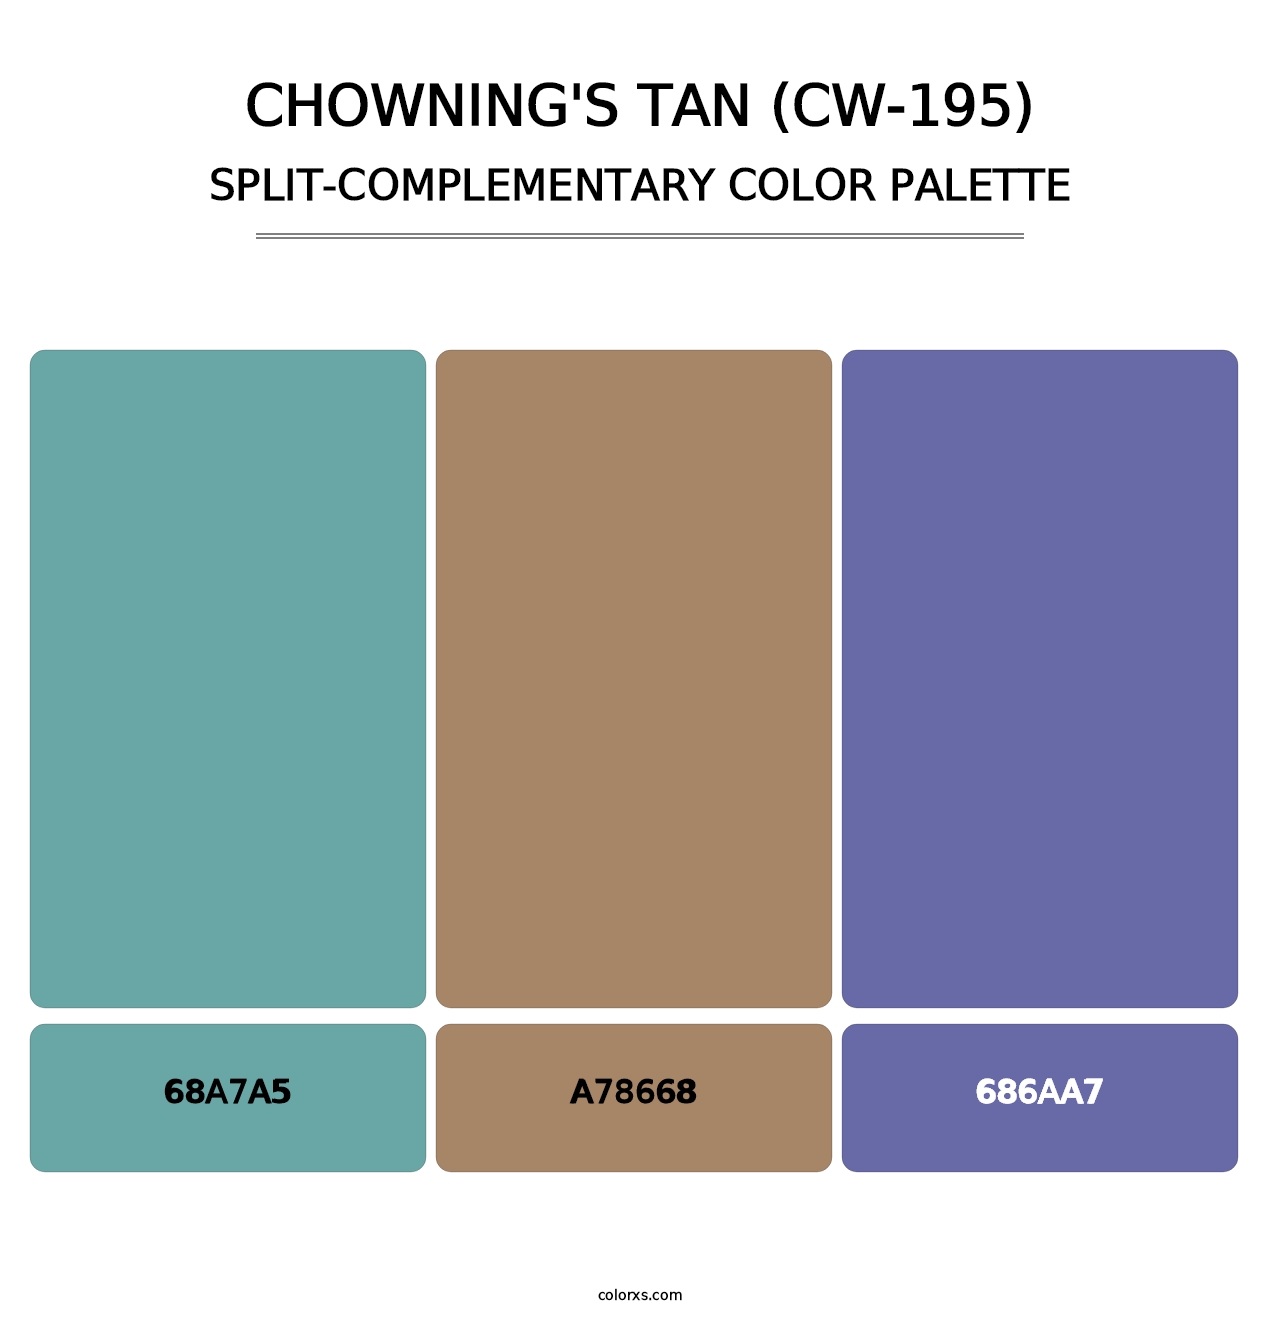 Chowning's Tan (CW-195) - Split-Complementary Color Palette